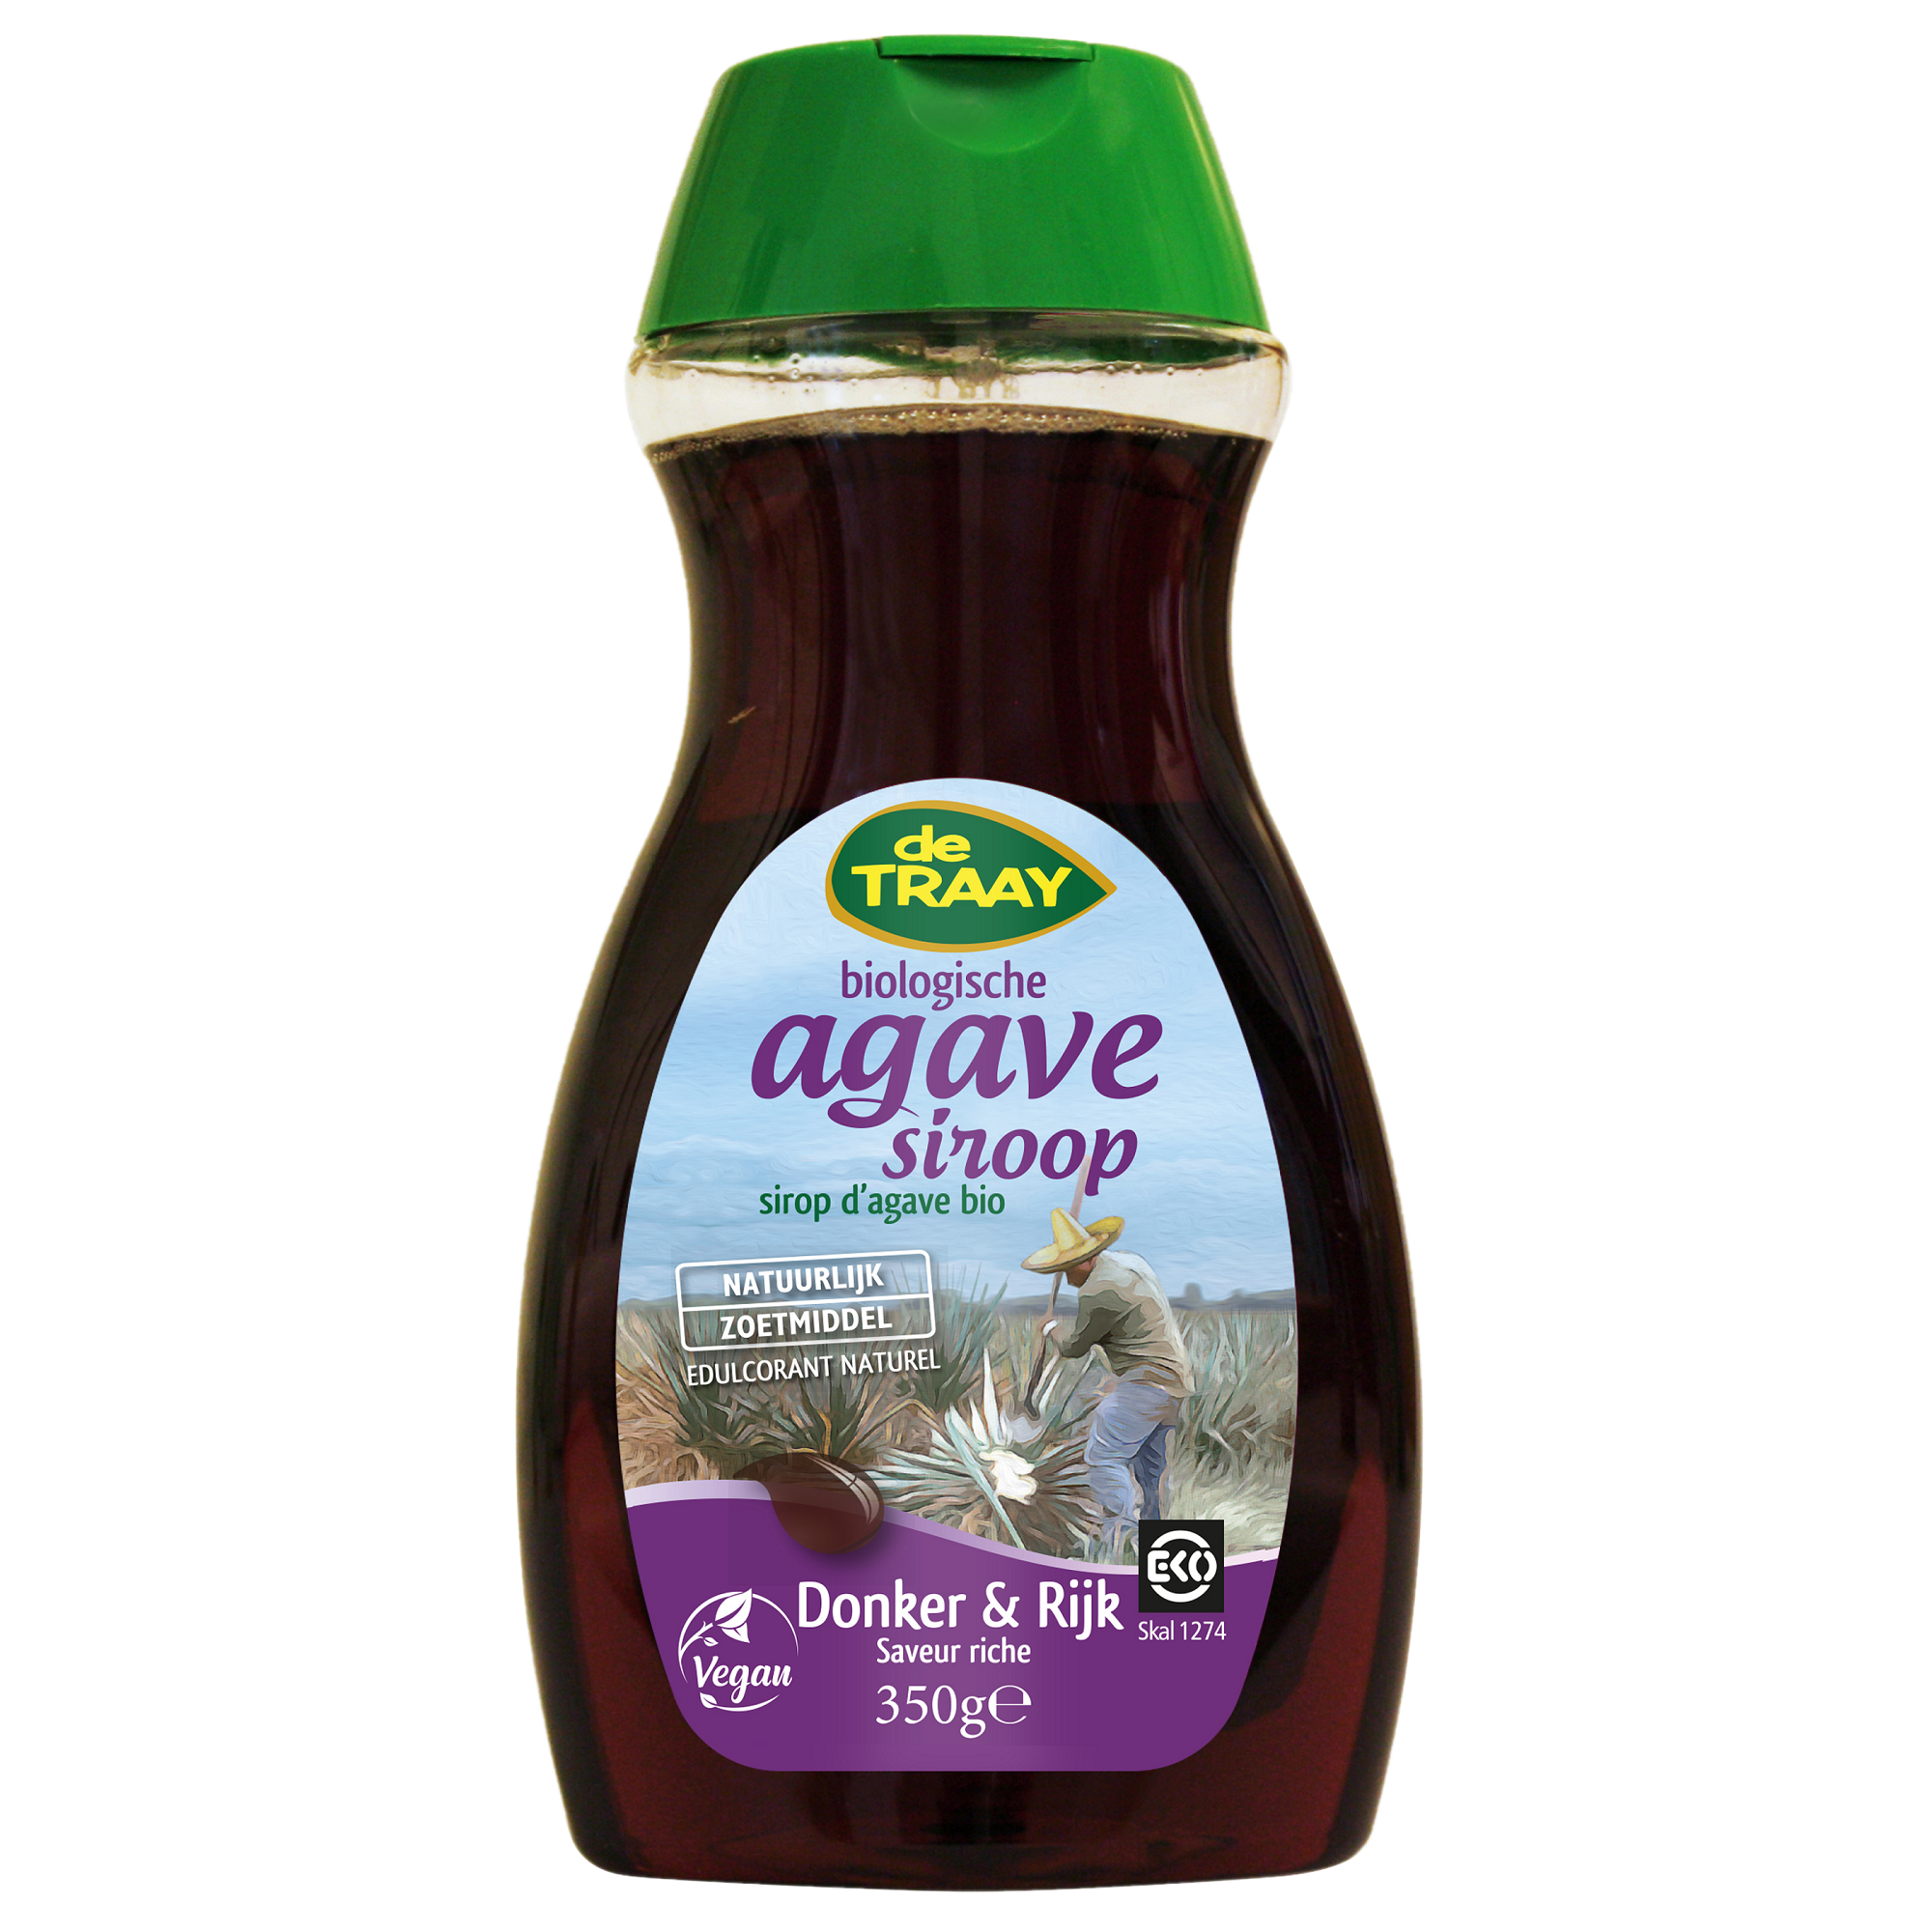 De Traay Agave donker bio 350g